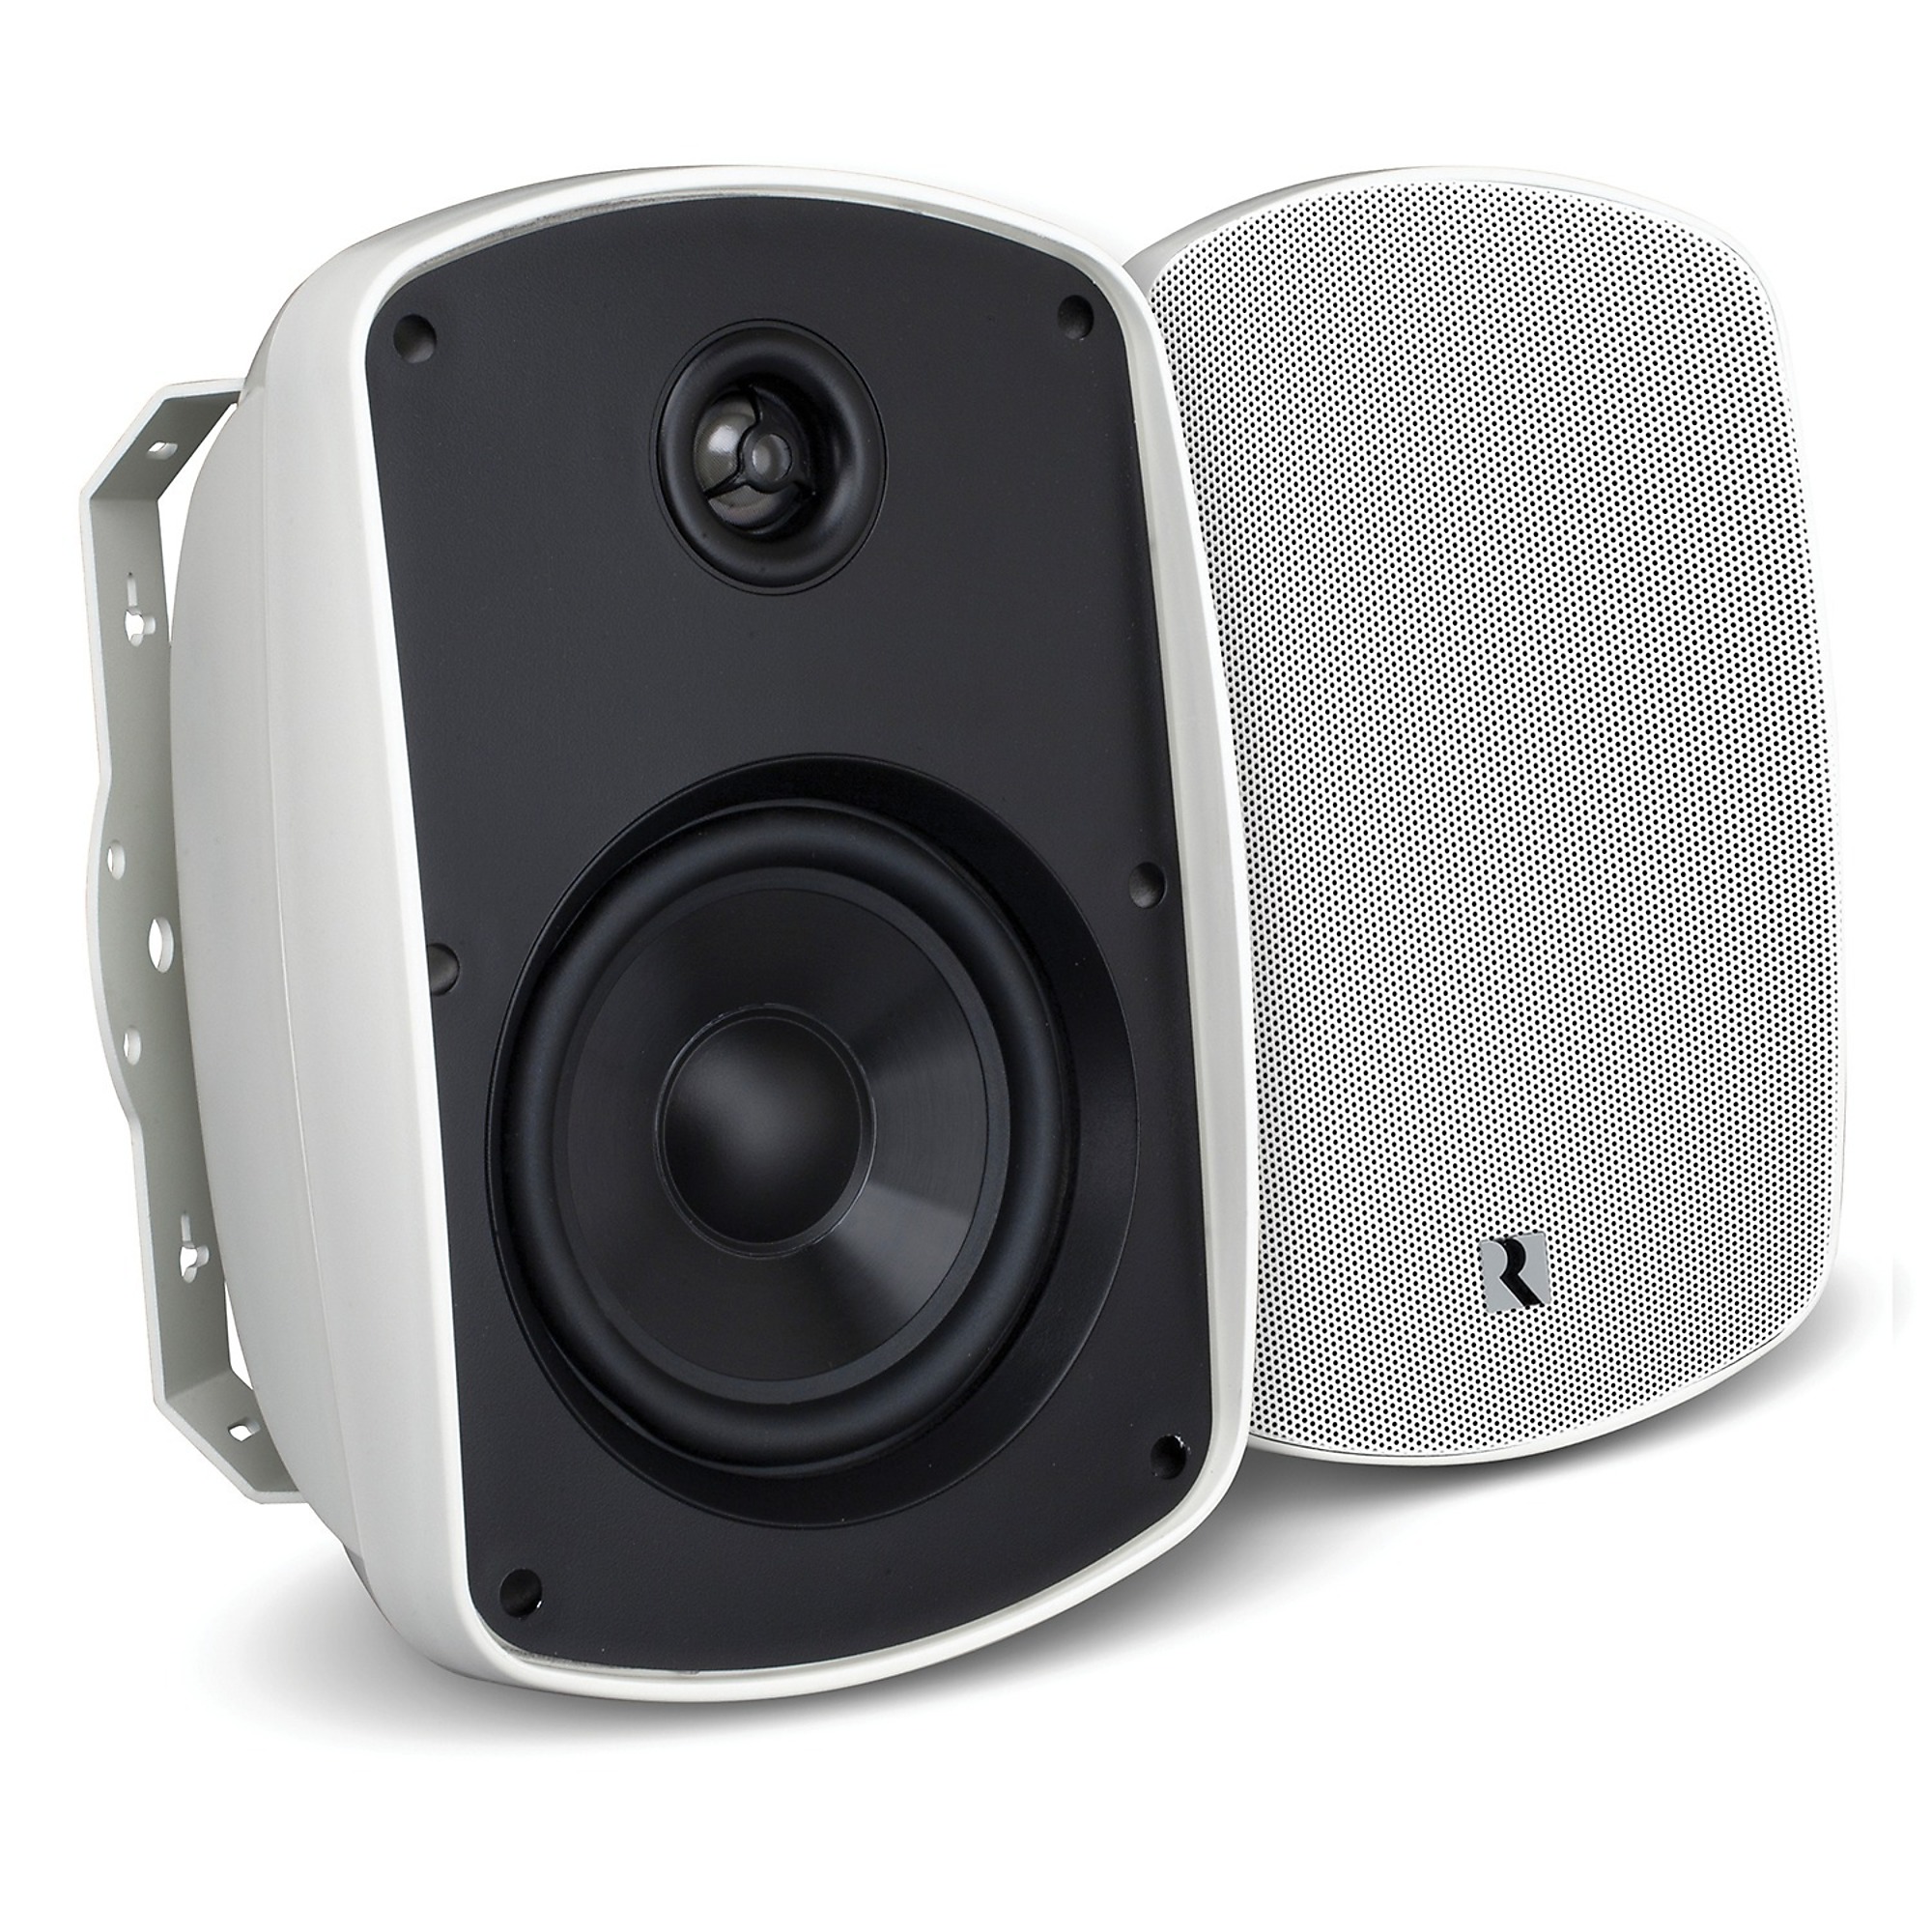 Russound Acclaim 5 Series, OutBack 5.25Inch 2-Way MK2 Outdoor Speakers, 2-Pack, Watts 125 Model 5B55mk2-W